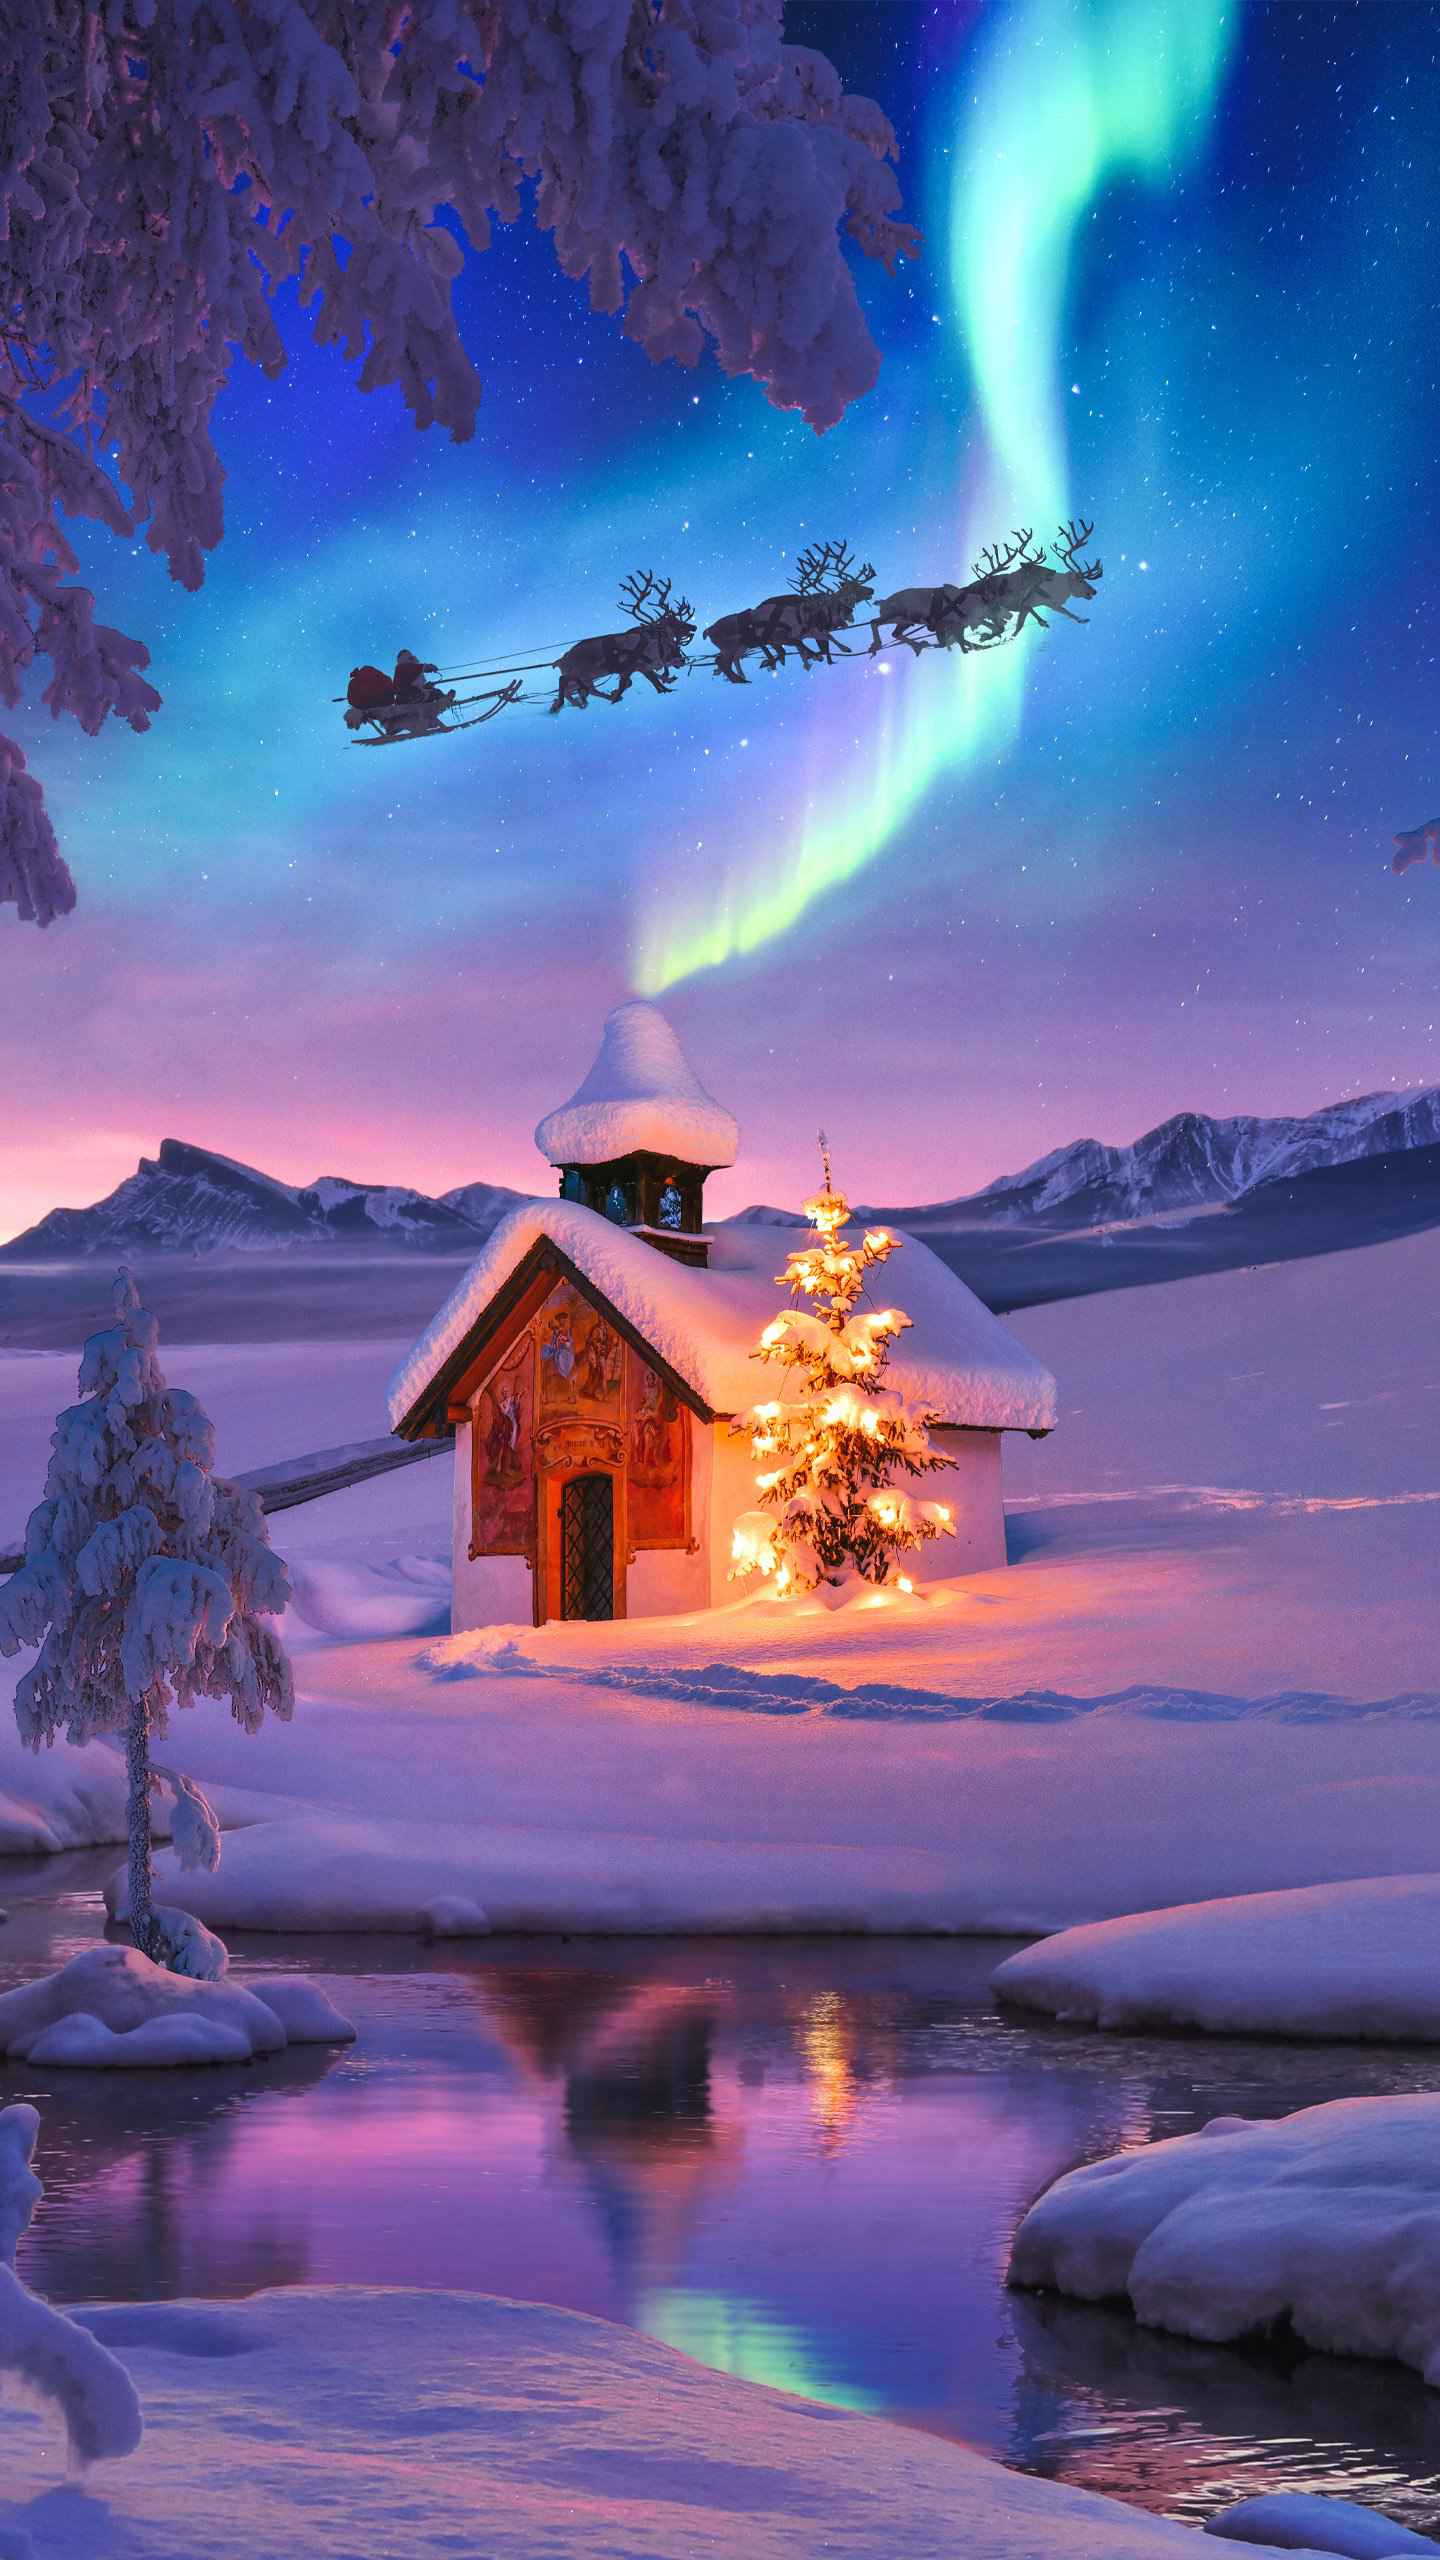 Christmas Cabin IPhone Wallpaper - IPhone Wallpapers ...